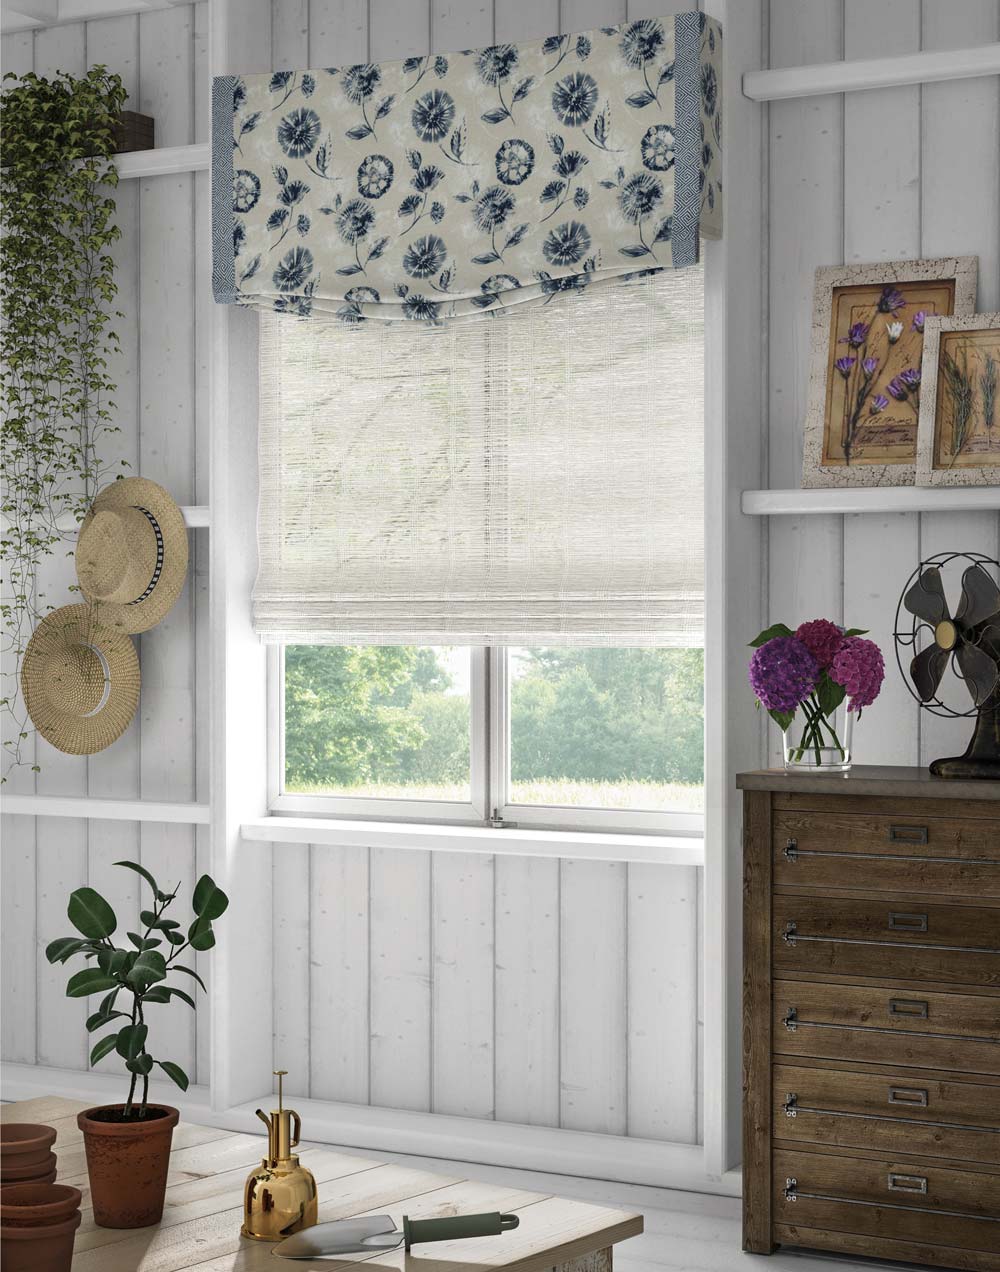 Interior Masterpieces® Custom Fabric Wrapped Cornice with white and blue floral material hanging on top of a white Woven Wood Manh Truc® Hobbled Roman Shade